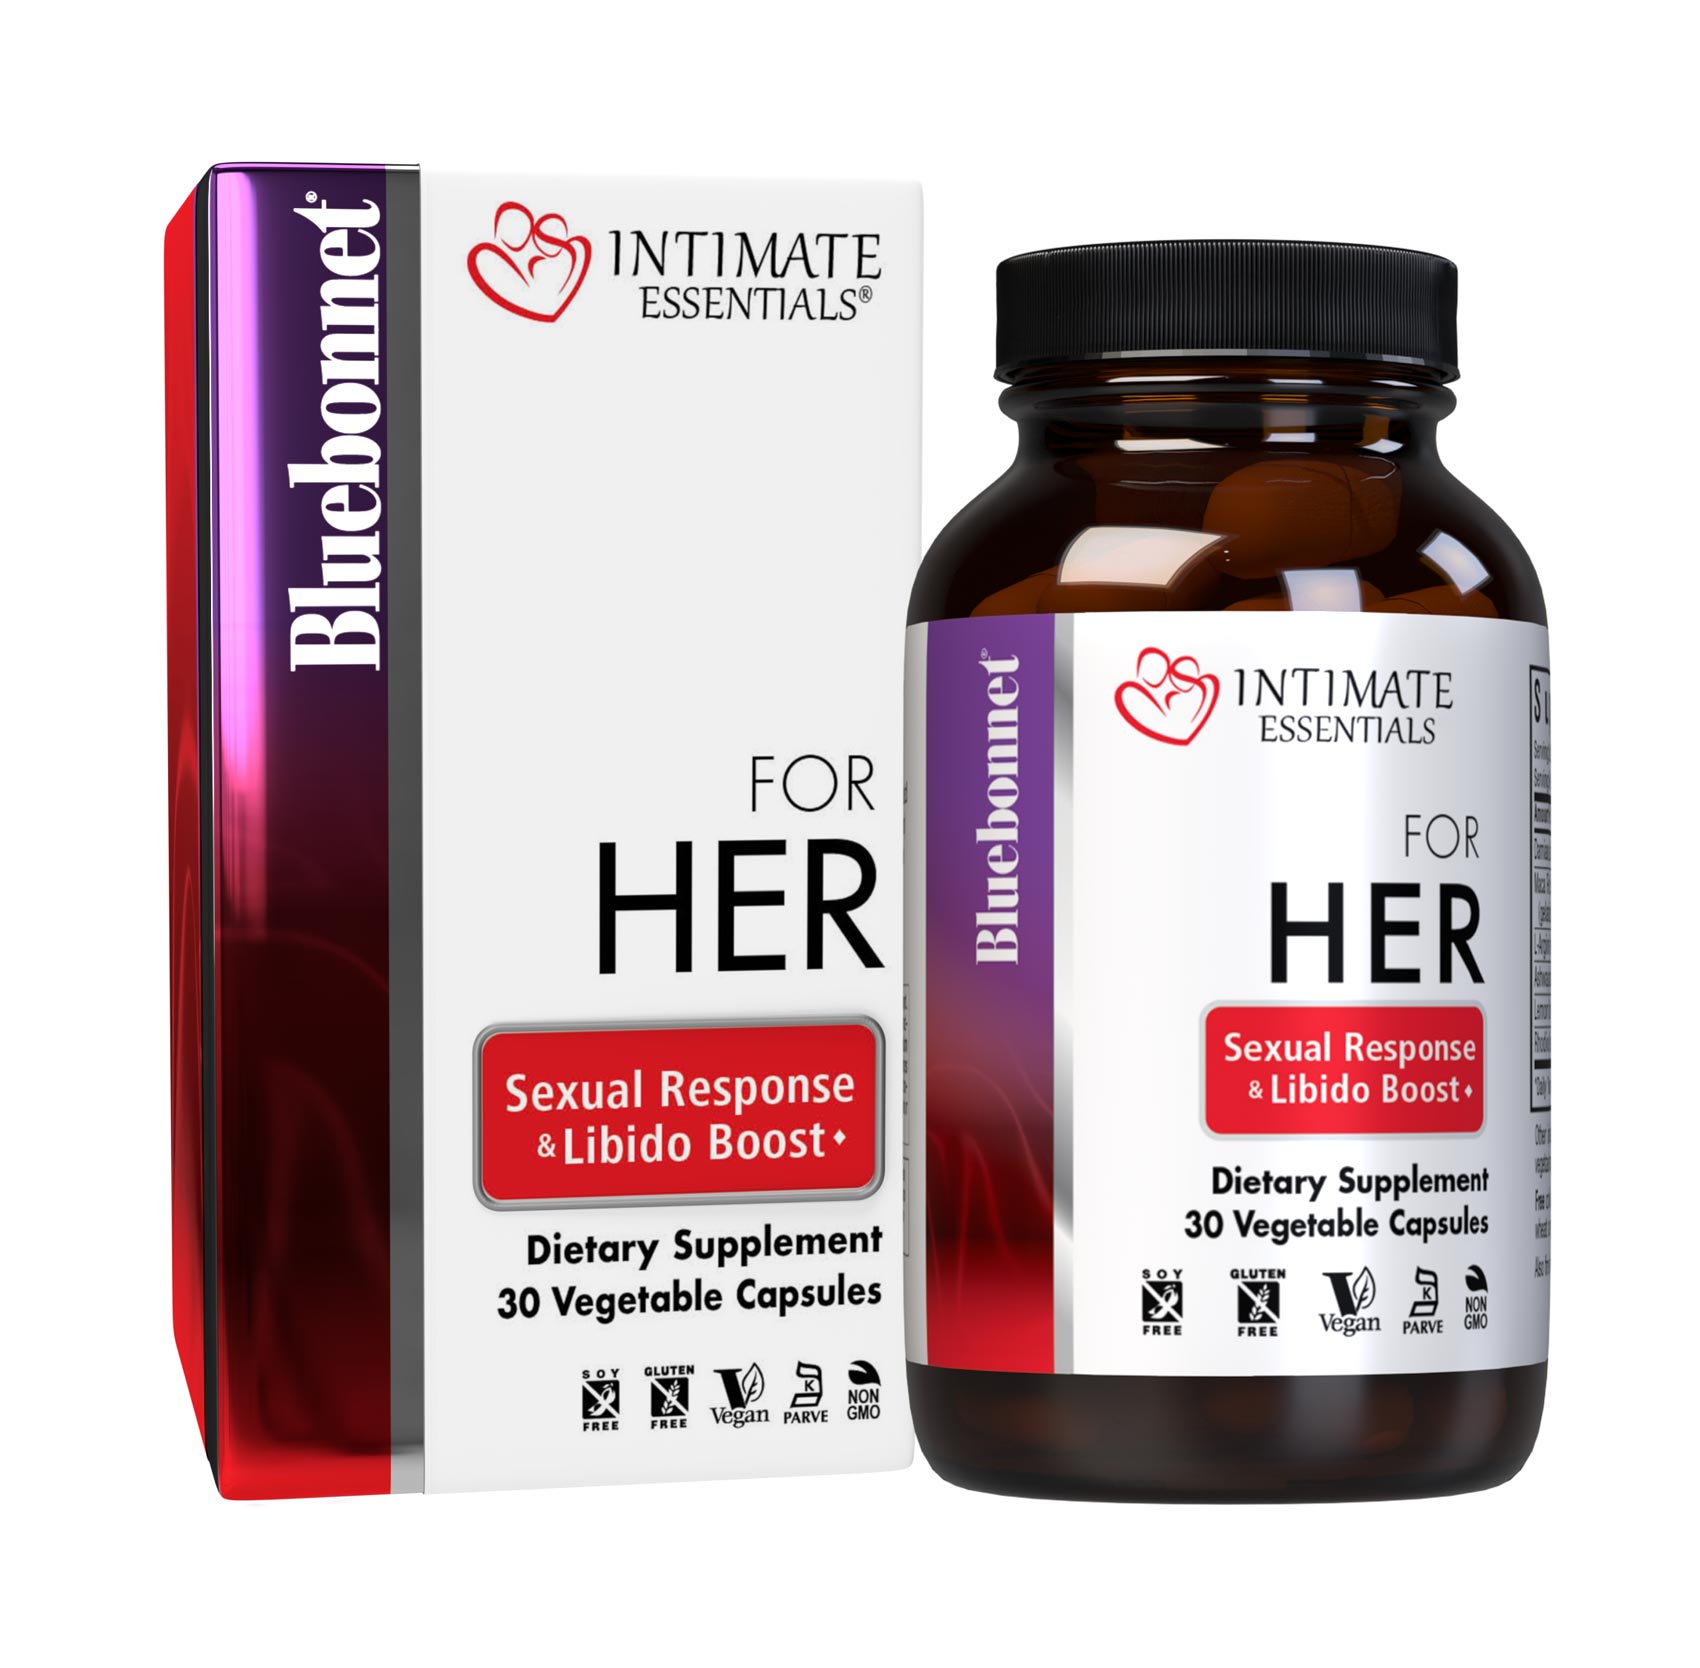 Bluebonnet’s Intimate Essentials For Her Sexual Response & Libido Boost, 30 pill count bottle with box.  #size_30 count